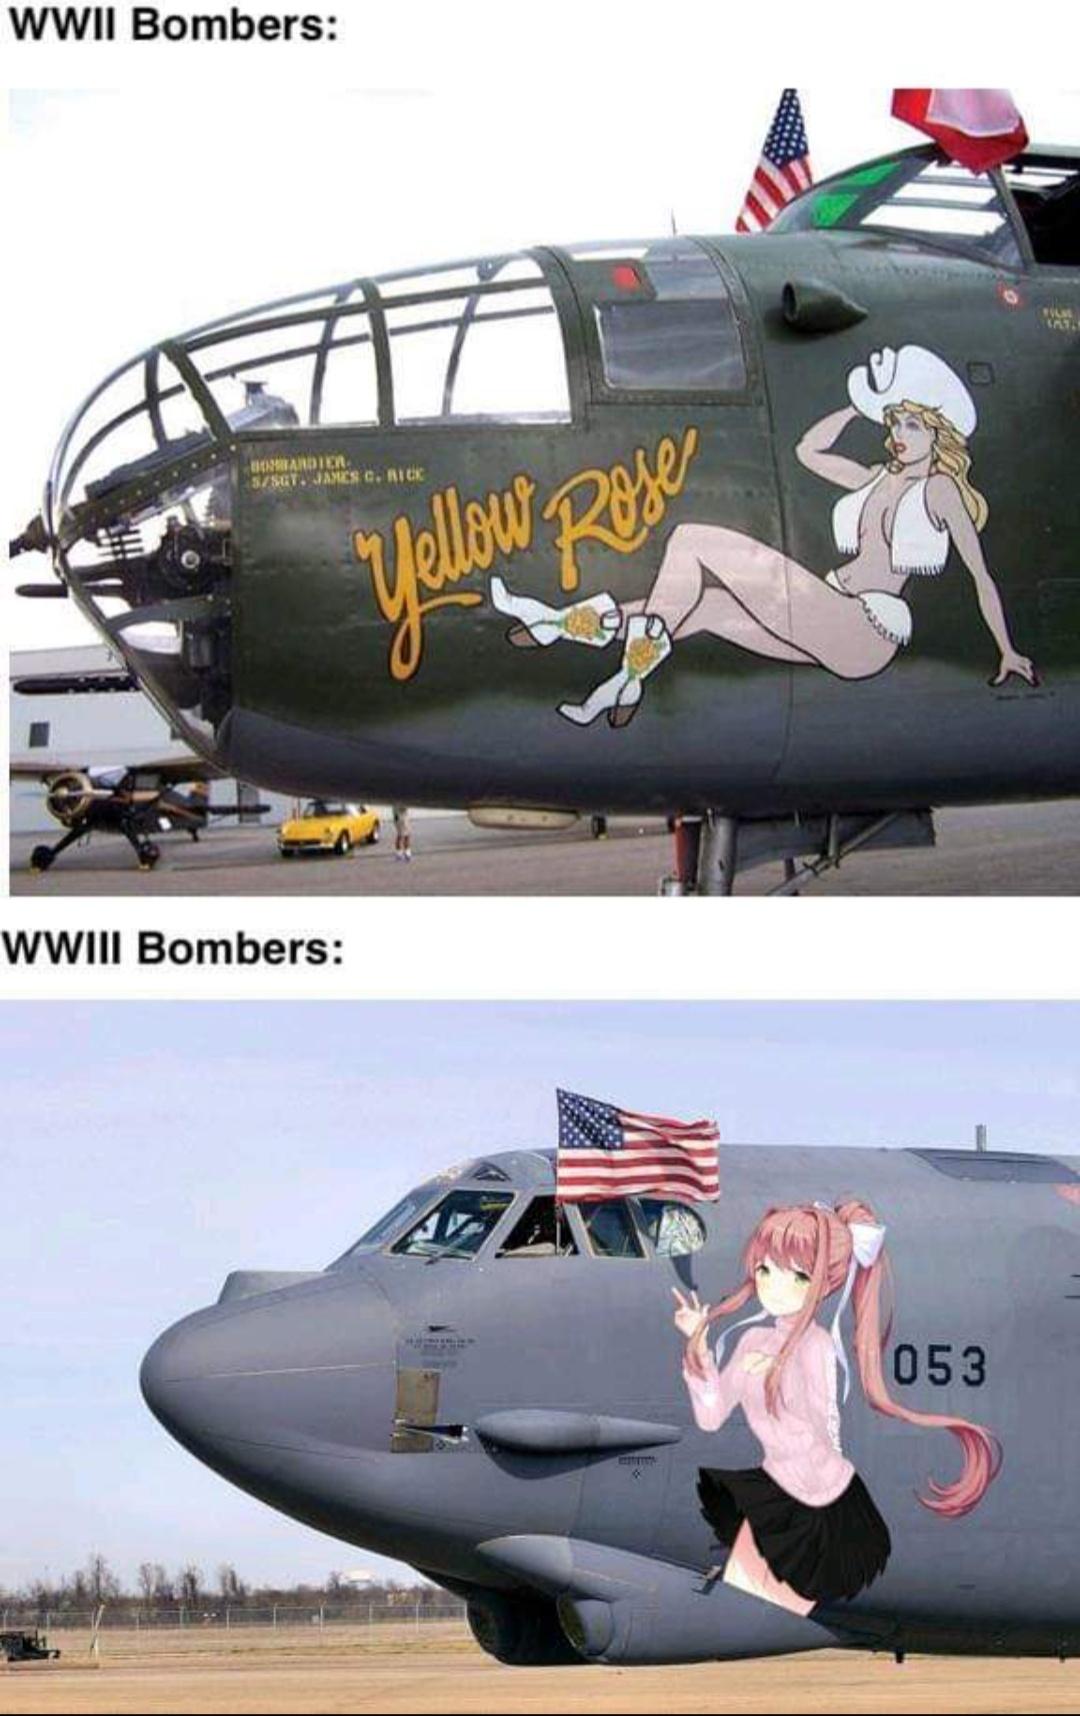 wwii nose art - Wwii Bombers Bardier SSgt. James C. Mice Yellow Rose Wwiii Bombers 053